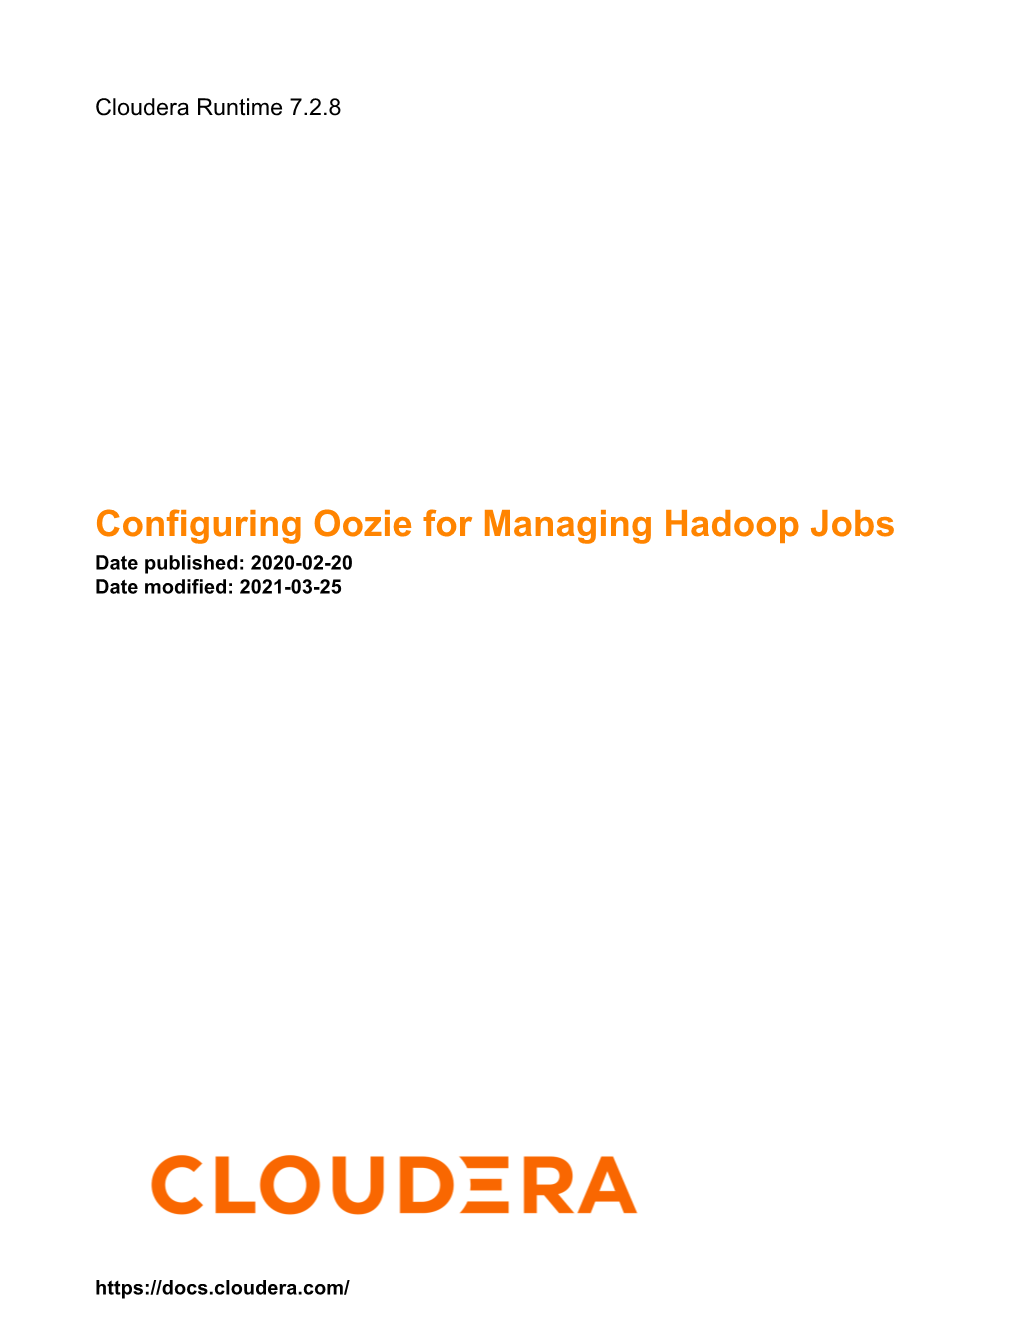 Configuring Oozie for Managing Hadoop Jobs Date Published: 2020-02-20 Date Modified: 2021-03-25